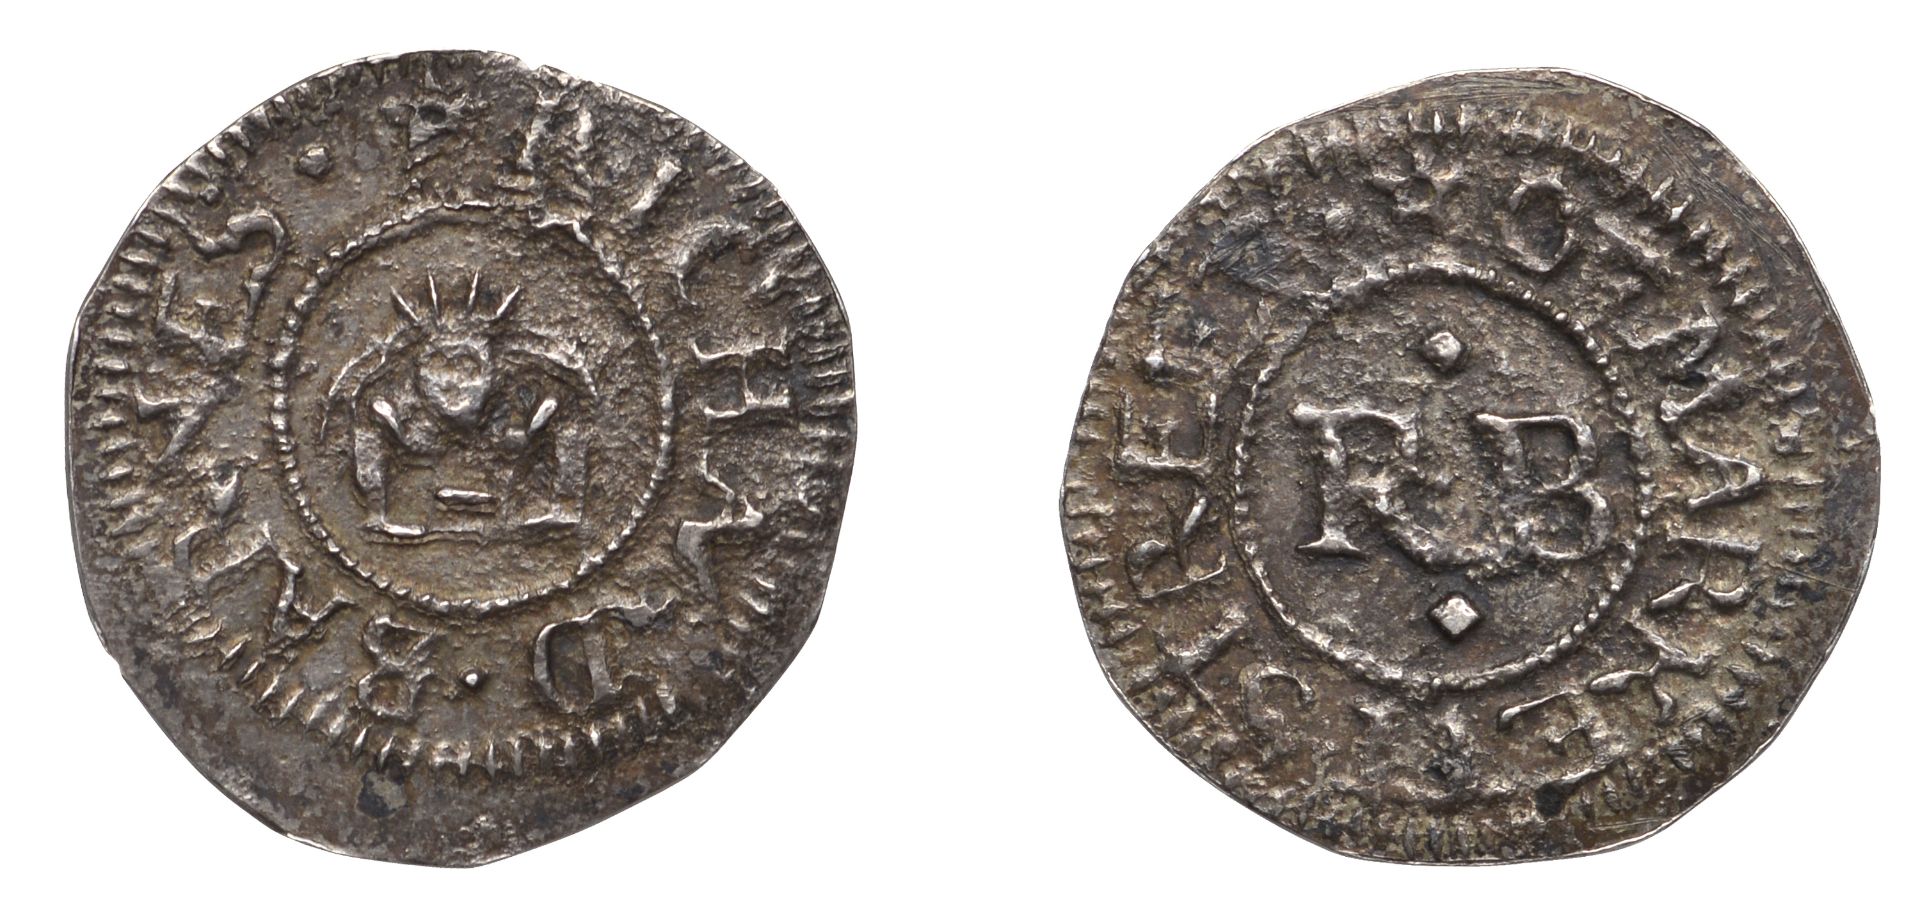 Markyate (partly in Bedfordshire), Richard Barnes, Farthing, in silver, 18mm, 1.28g/9h (GO 7...